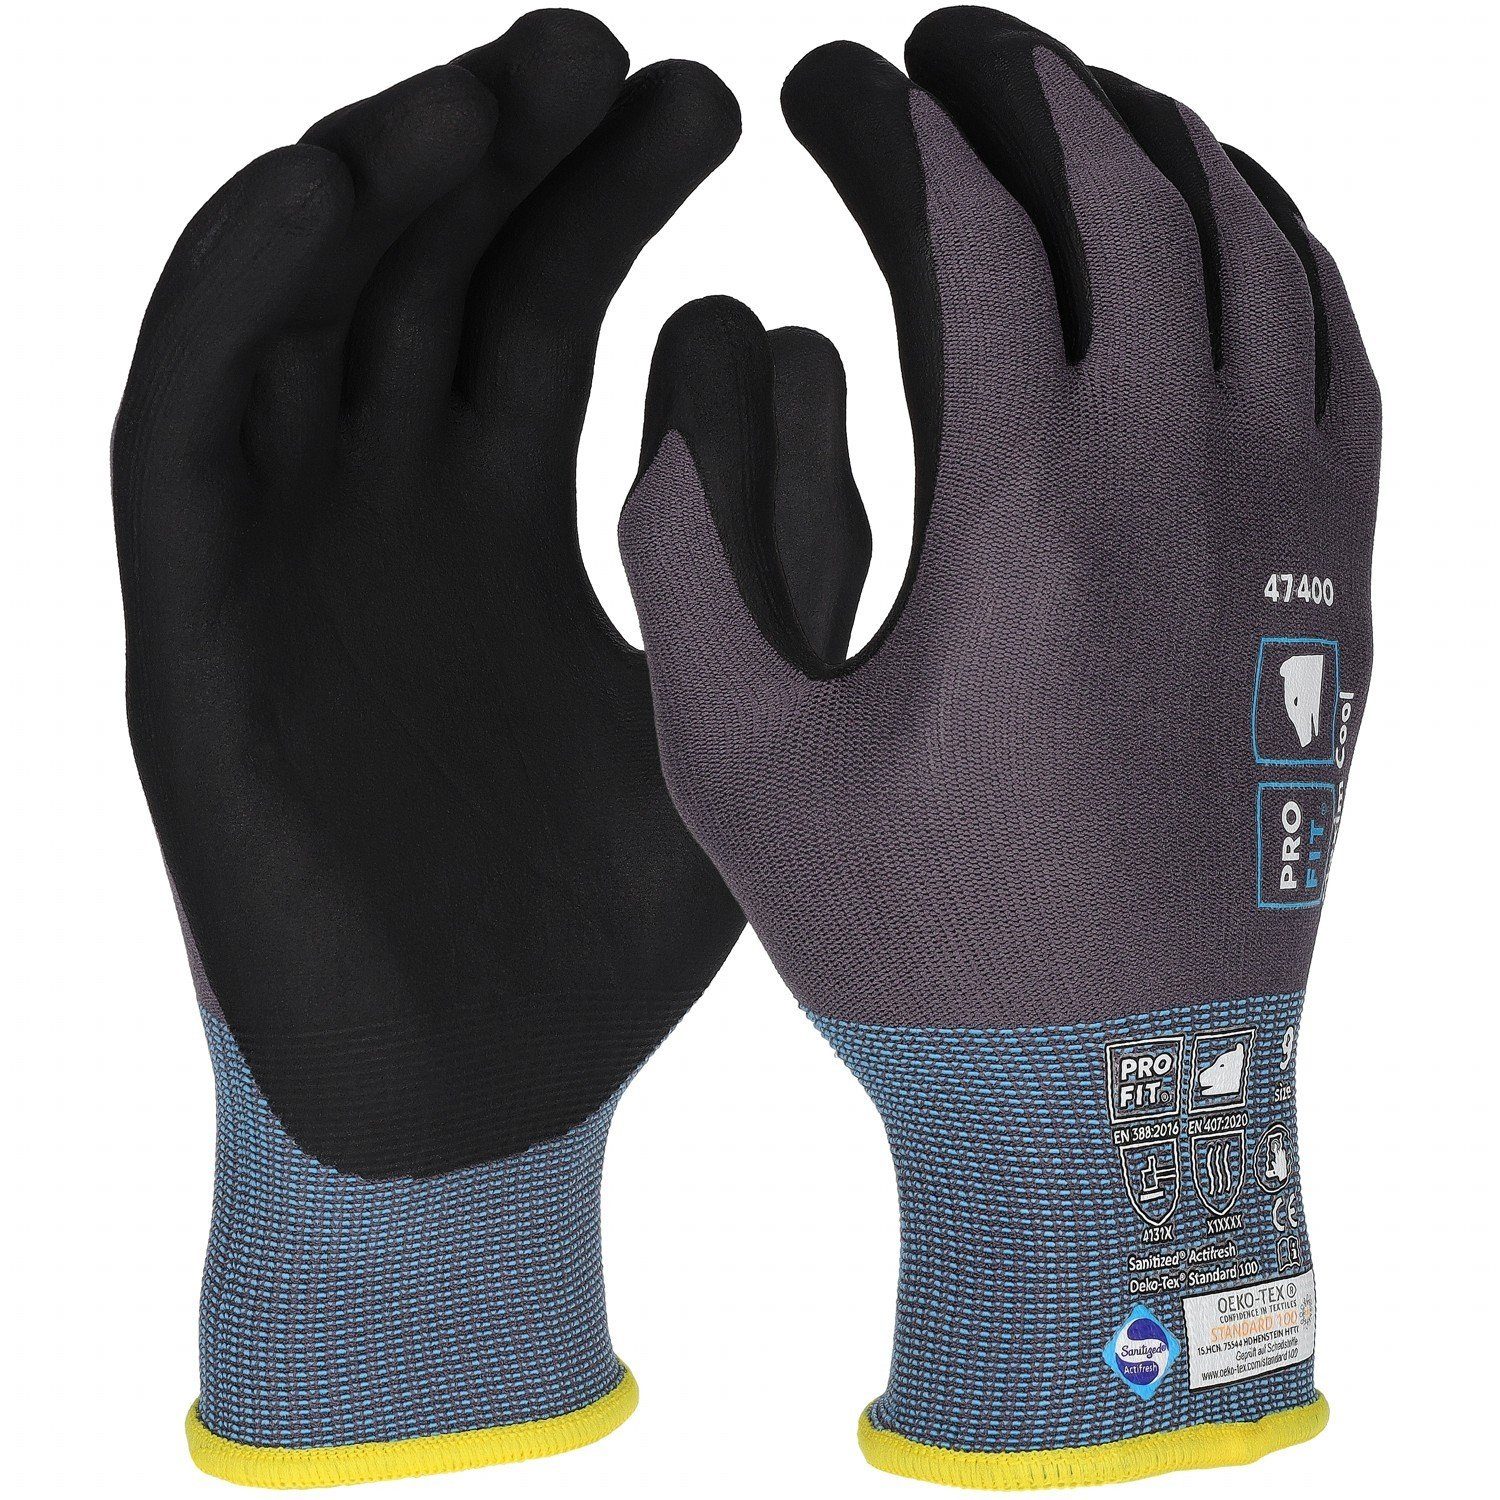 PRO FIT by Fitzner Montage-Handschuhe PRO FIT Nitril Handschuhe, 'Maxim cool', grau / sc (12, Paar) Sanitized®